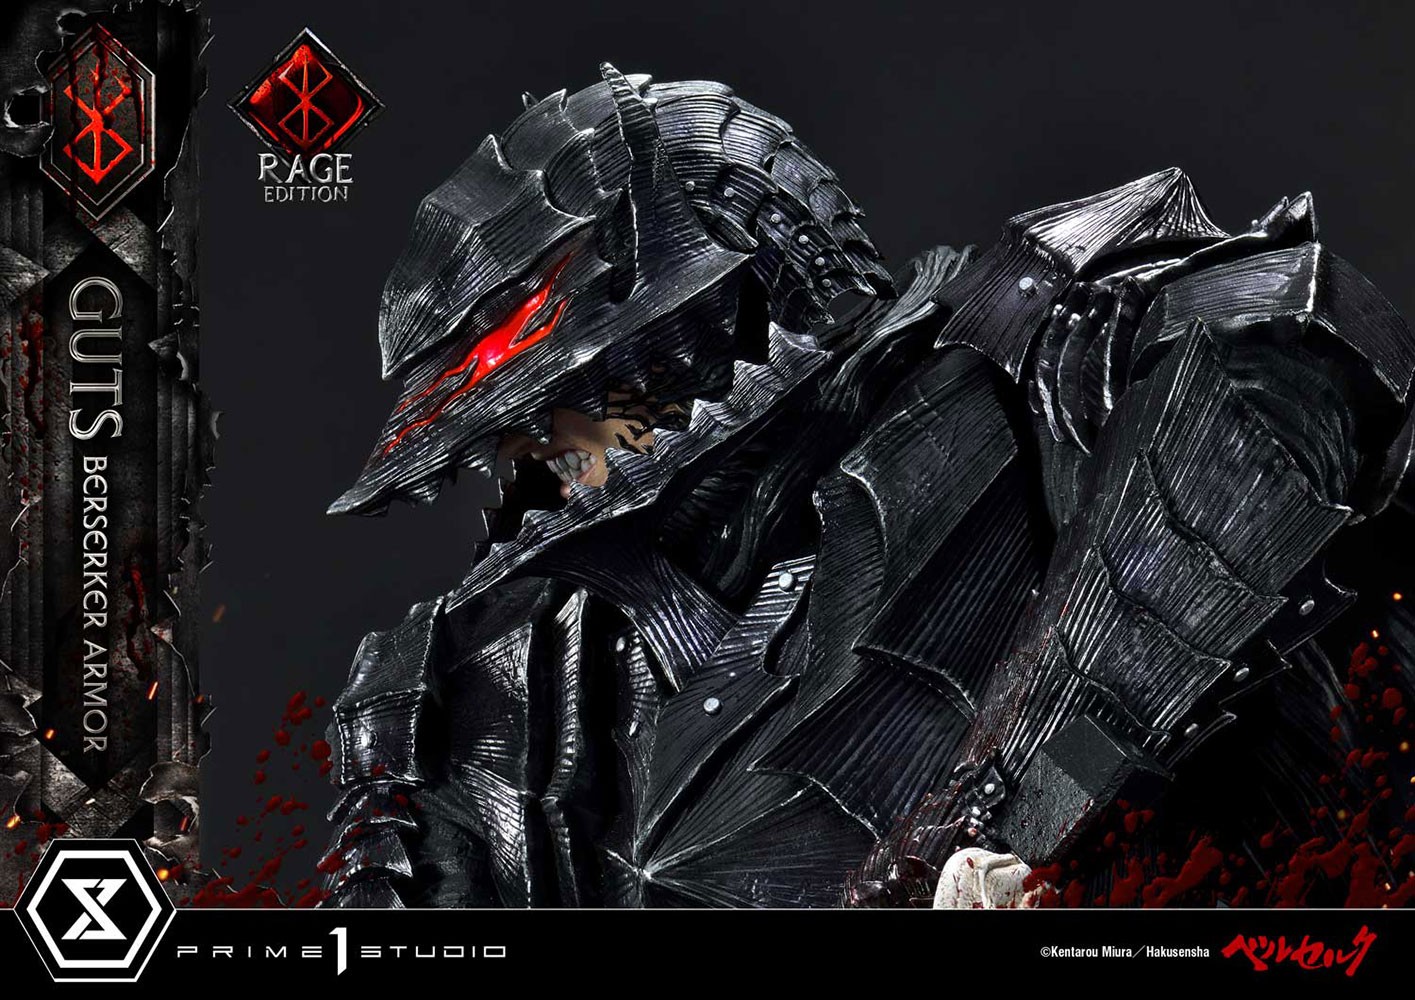 Guts Berserker Armor (Rage Edition) Collector Edition (Prototype Shown) View 14